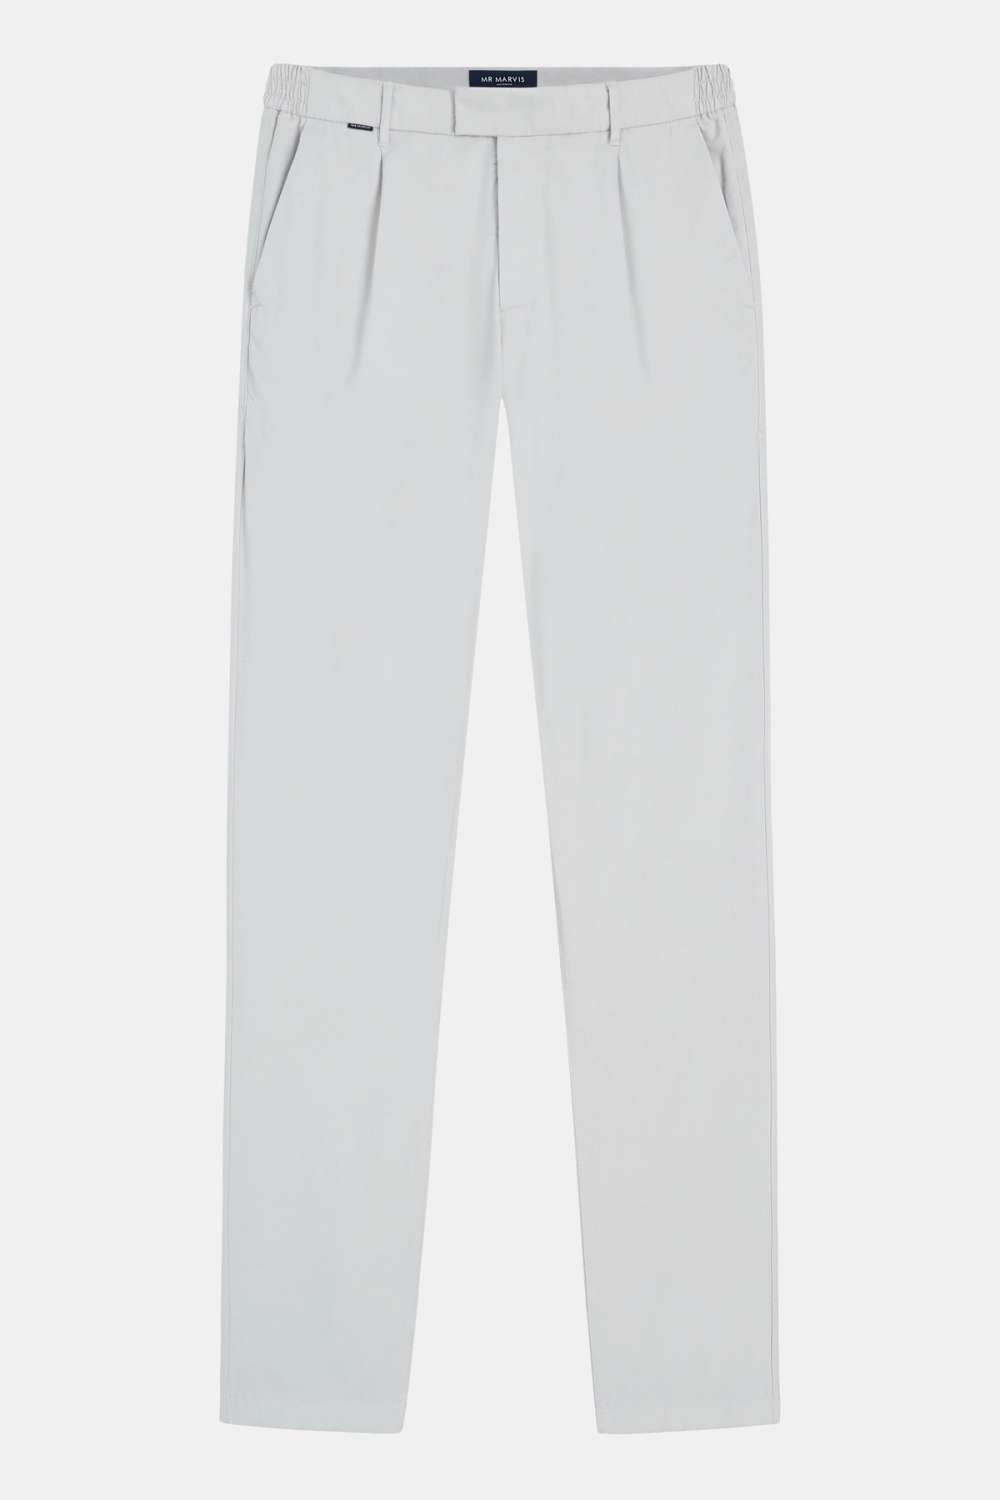 Gullwings * The Classic Chinos